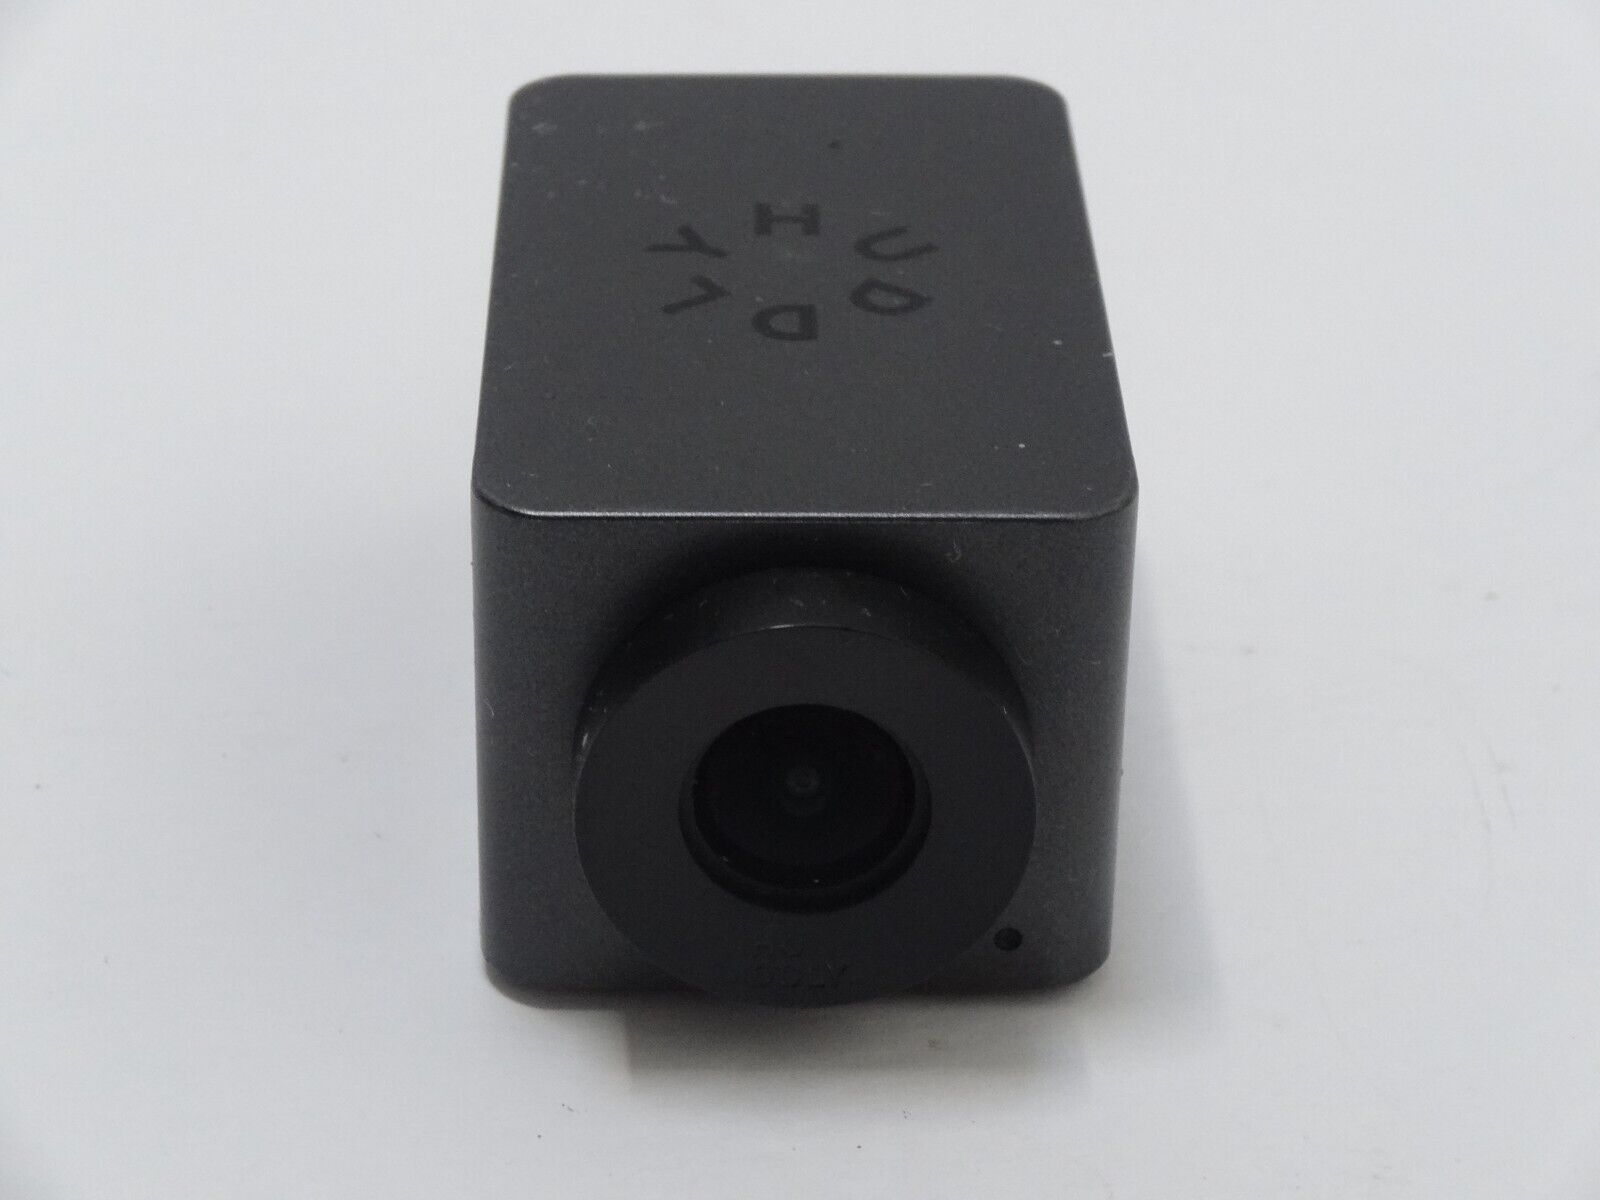 Huddly Go 1.0 USB Video Conferencing Camera TESTED